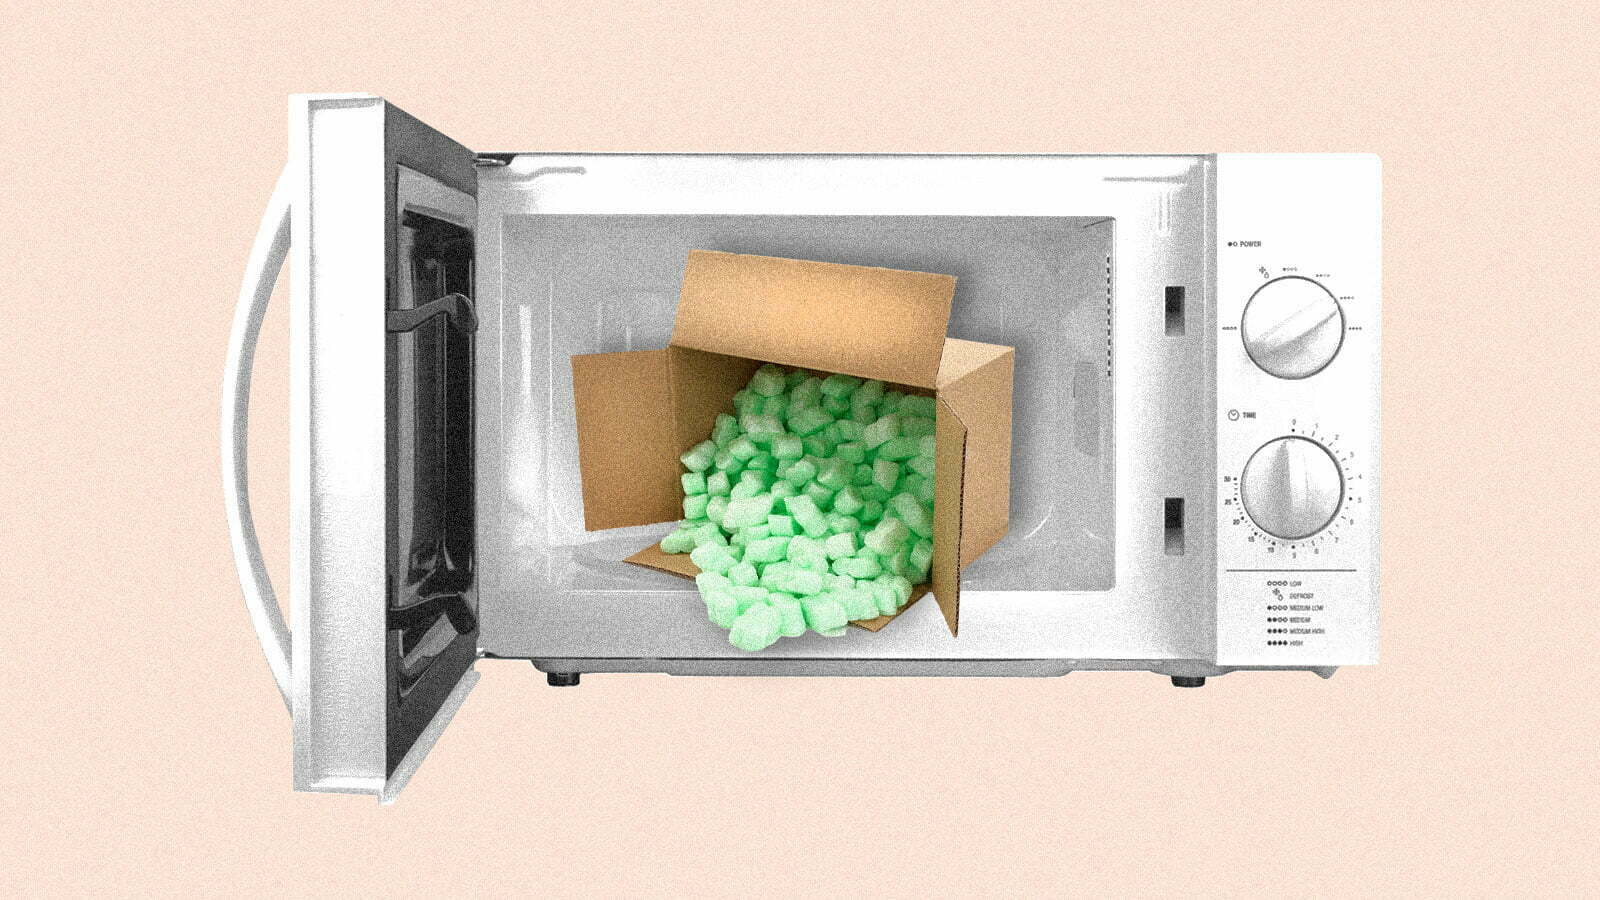 Microwaves could be the future for plastic recycling